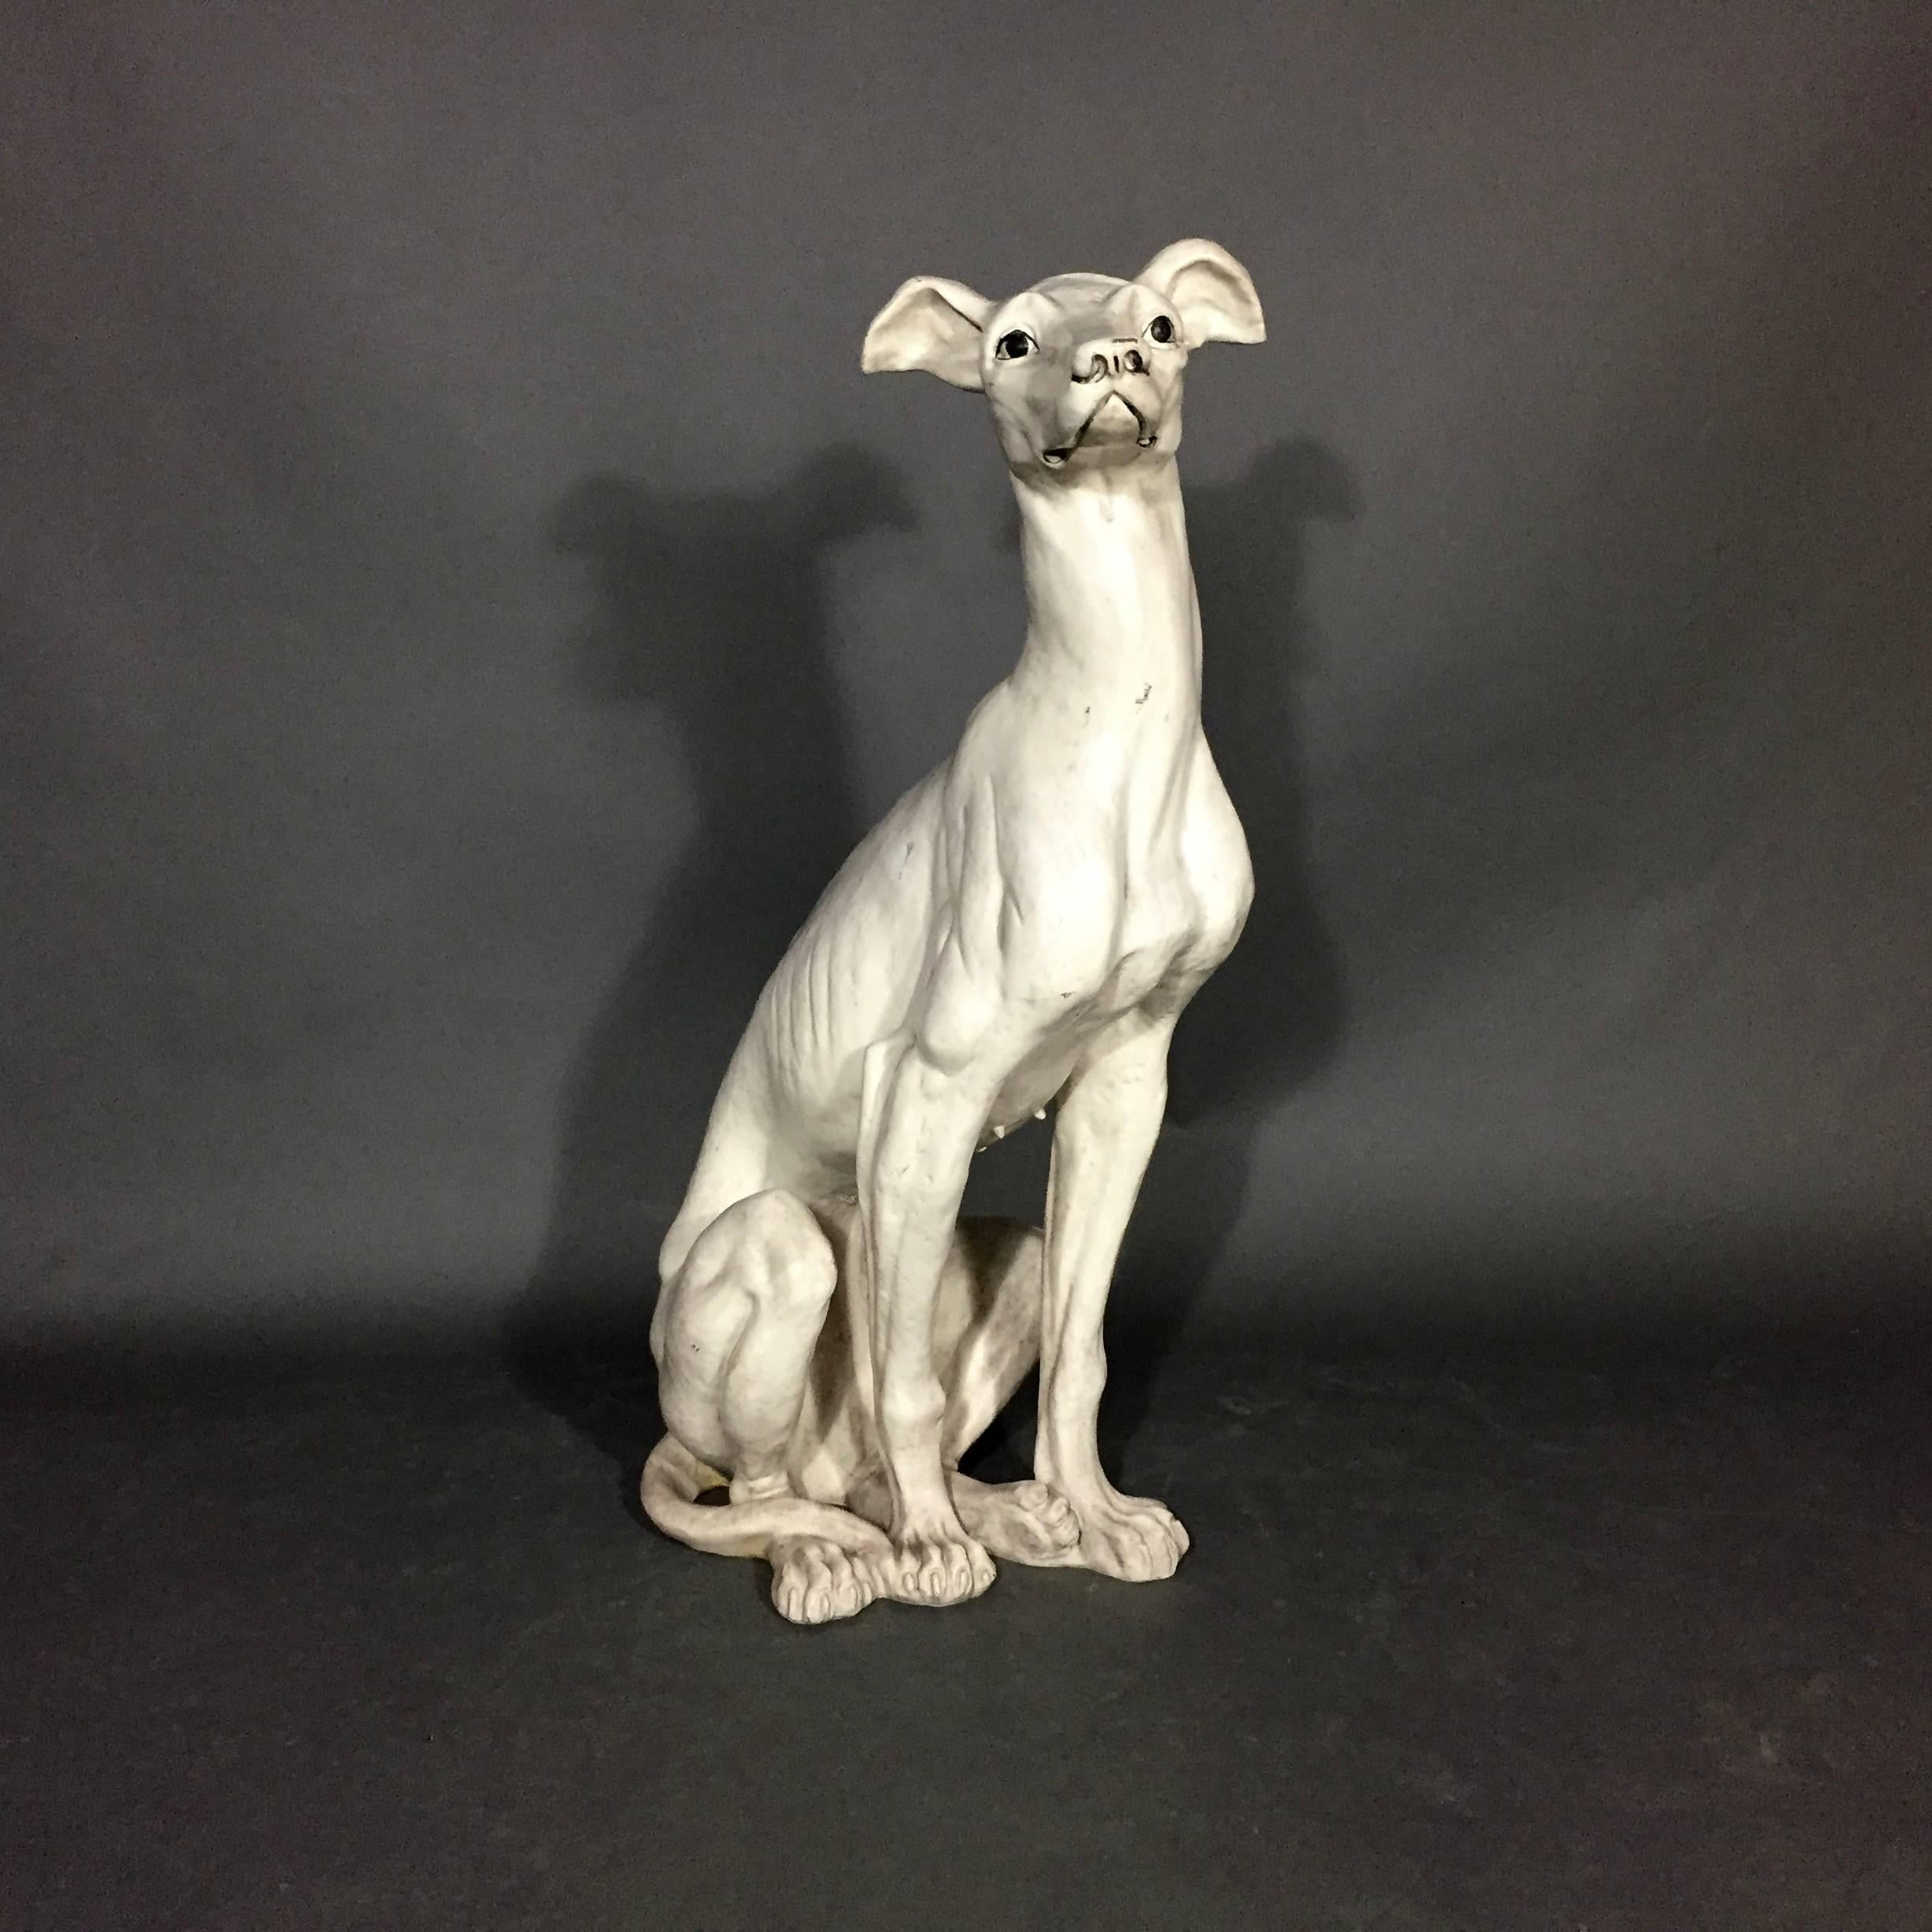 Tall, slender and graceful - the Italian Greyhound is swift and keenly sighted. This composite female example has a wonderful patina and in the Hollywood Regency style.